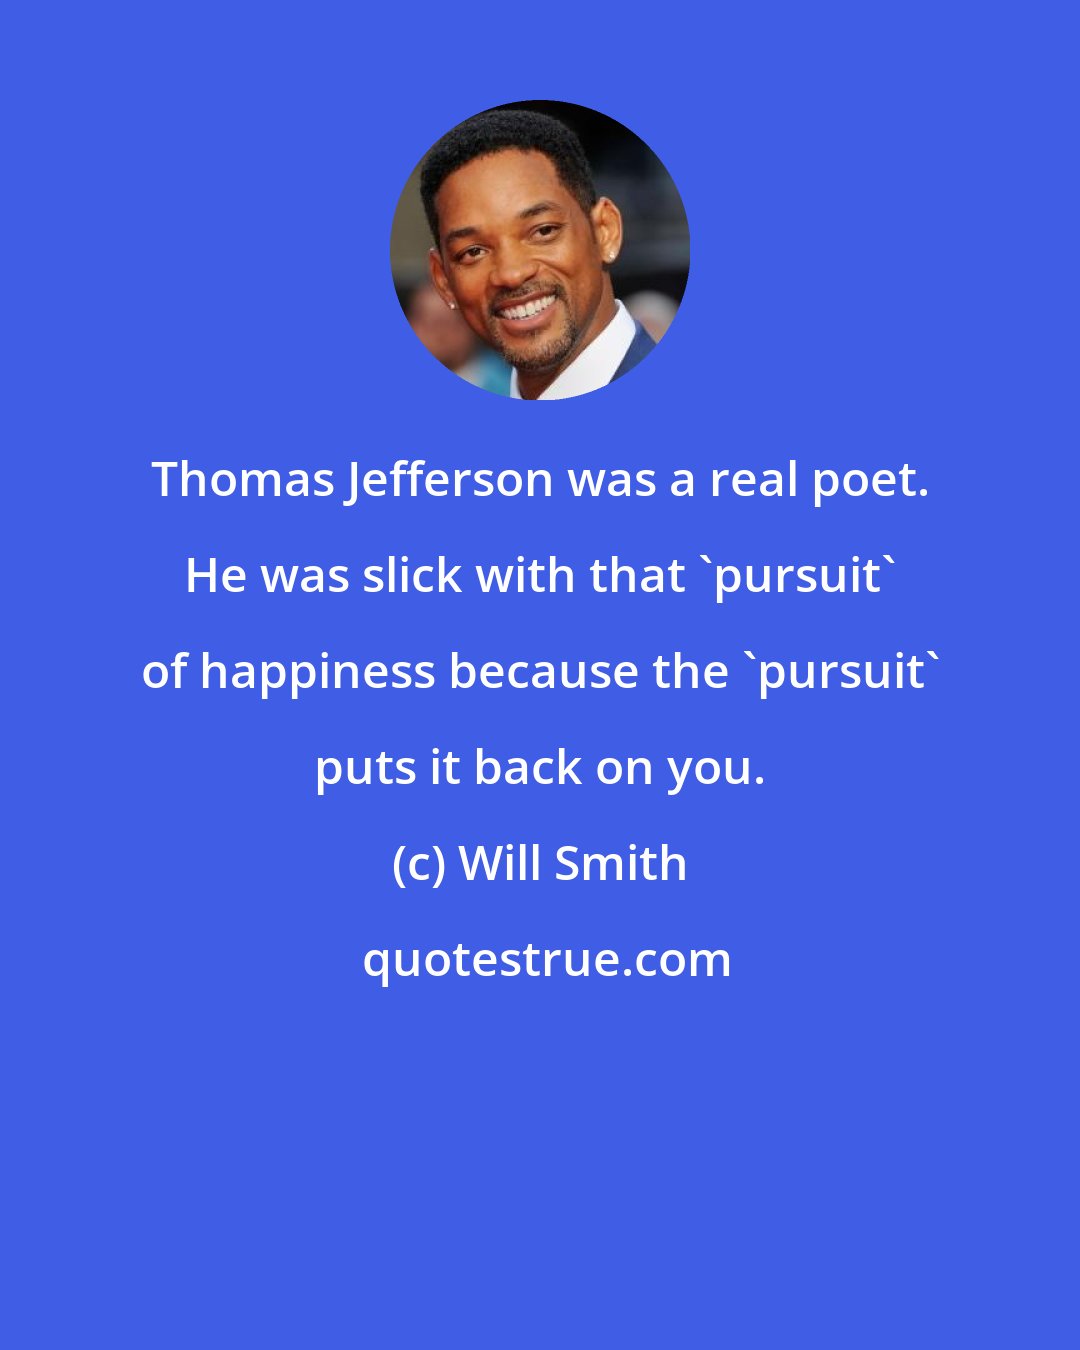 Will Smith: Thomas Jefferson was a real poet. He was slick with that 'pursuit' of happiness because the 'pursuit' puts it back on you.